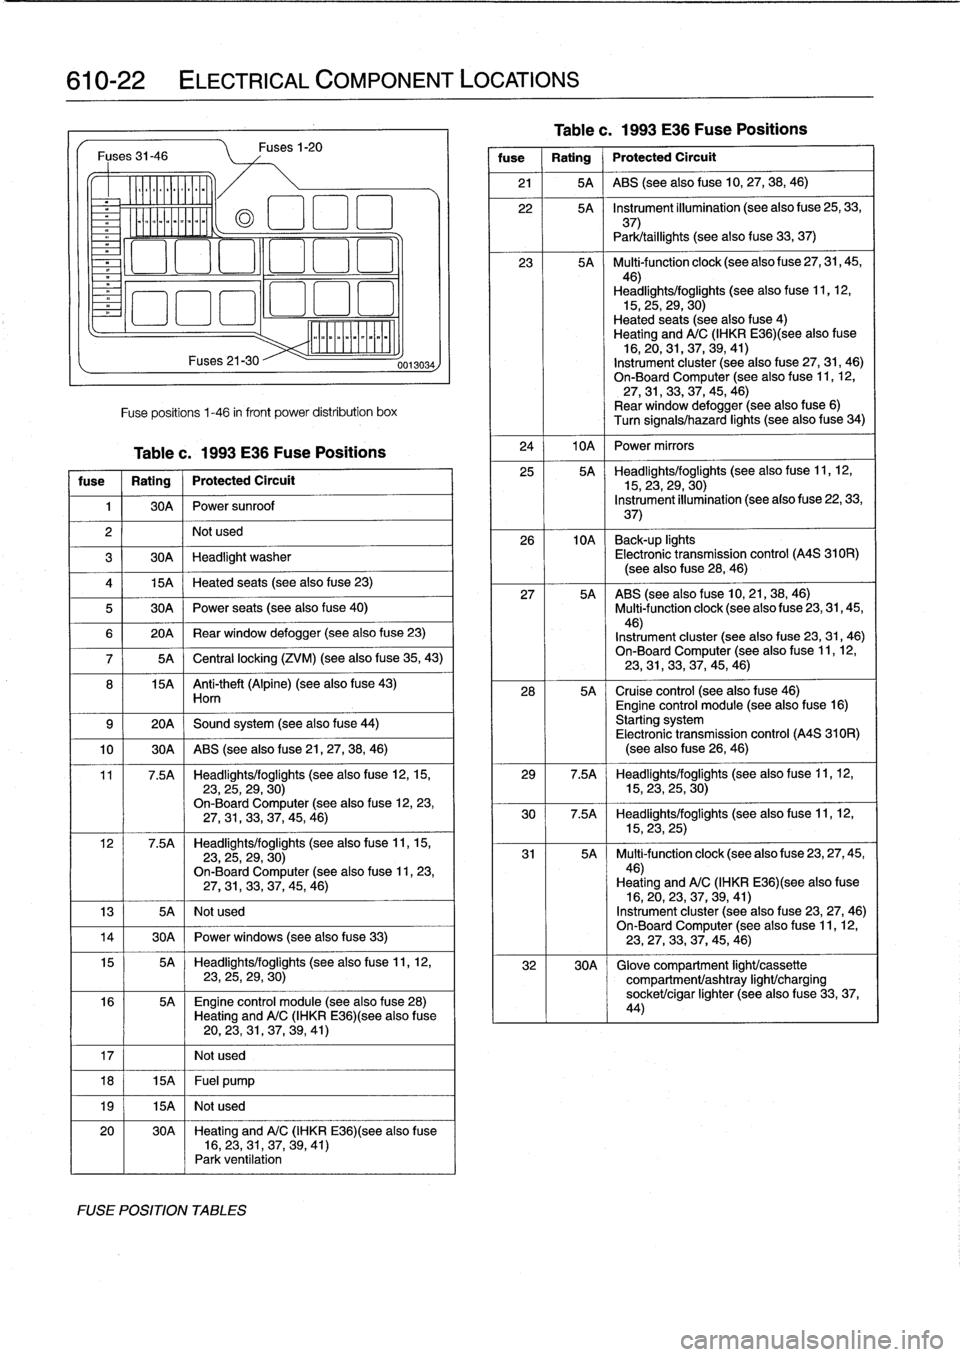 BMW 318i 1998 E36 Workshop Manual 
610-22

	

ELECTRICAL
COMPONENT
LOCATIONS

Fuses
31-46

Ylililll

milililil
Fuses
21-30
Fuse
positions
1-46
in
front
Power
distribution
box

Table
c
.
1993
E36
Fuse
Positions

fuse

	

1
Rating

	

j